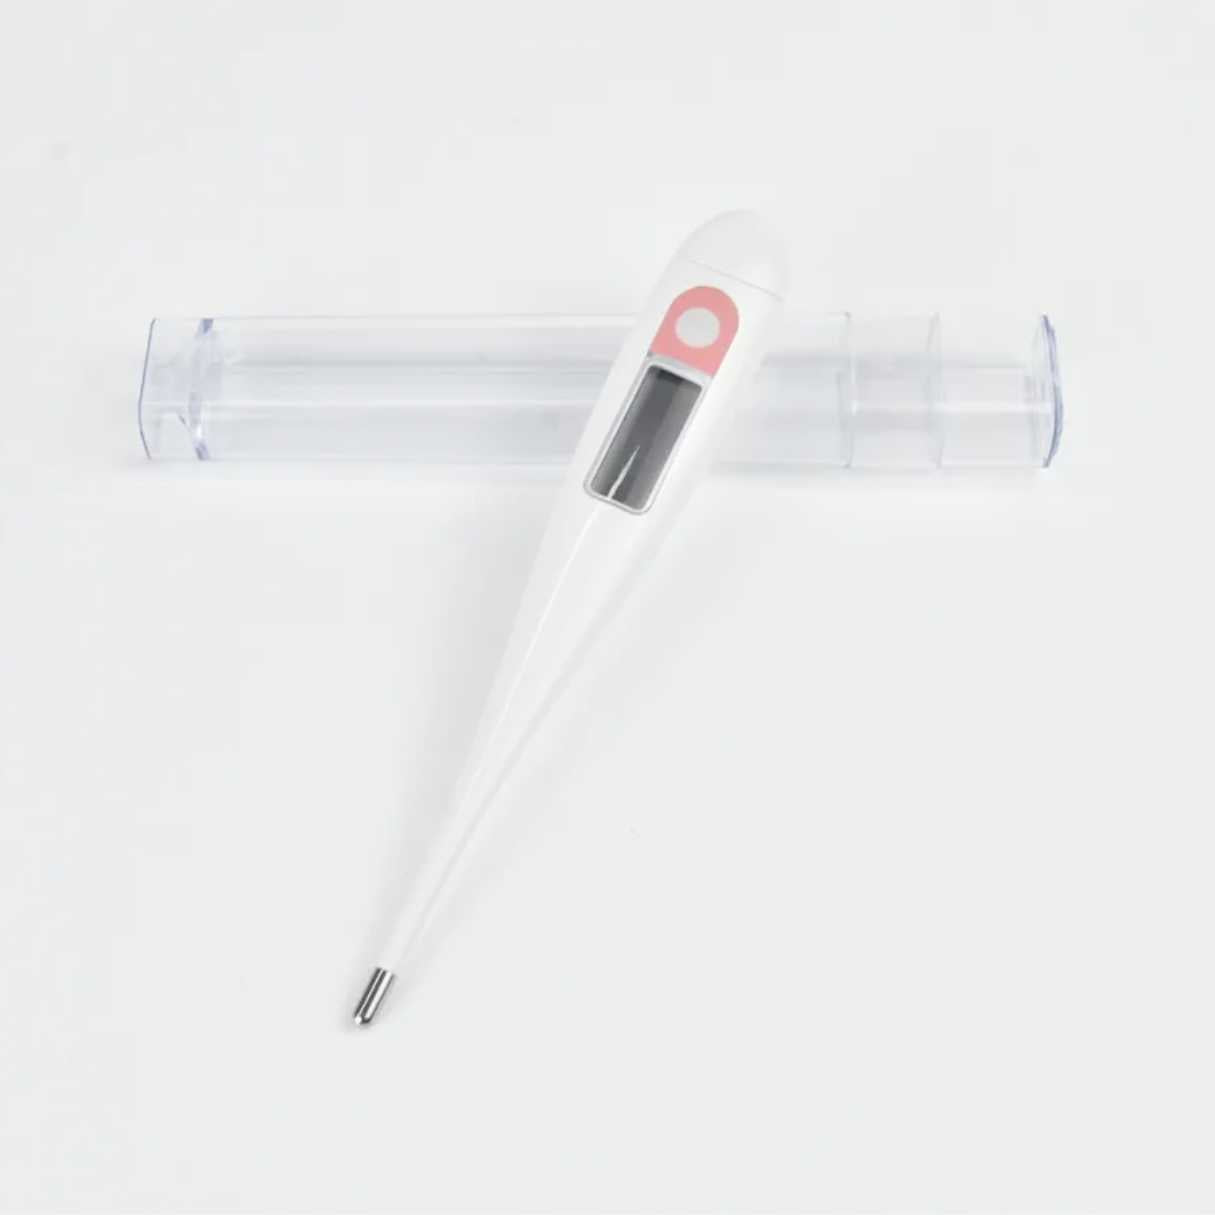 BBT with case for tracking ovulation day ovulation thermometer for tracking most fertile days